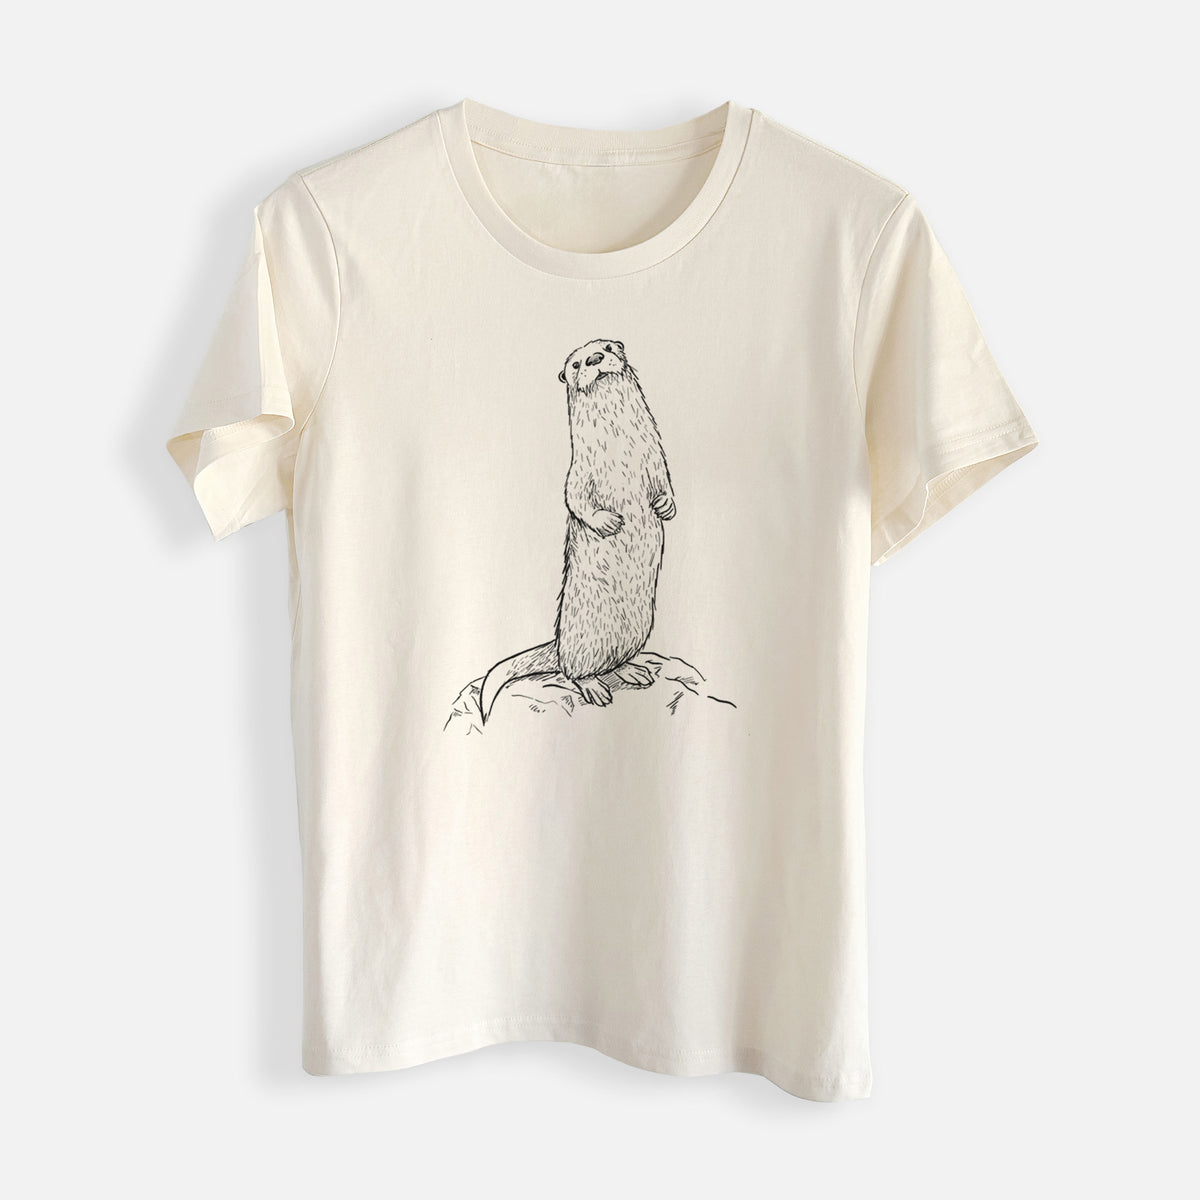 North American River Otter - Lontra canadensis - Womens Everyday Maple Tee